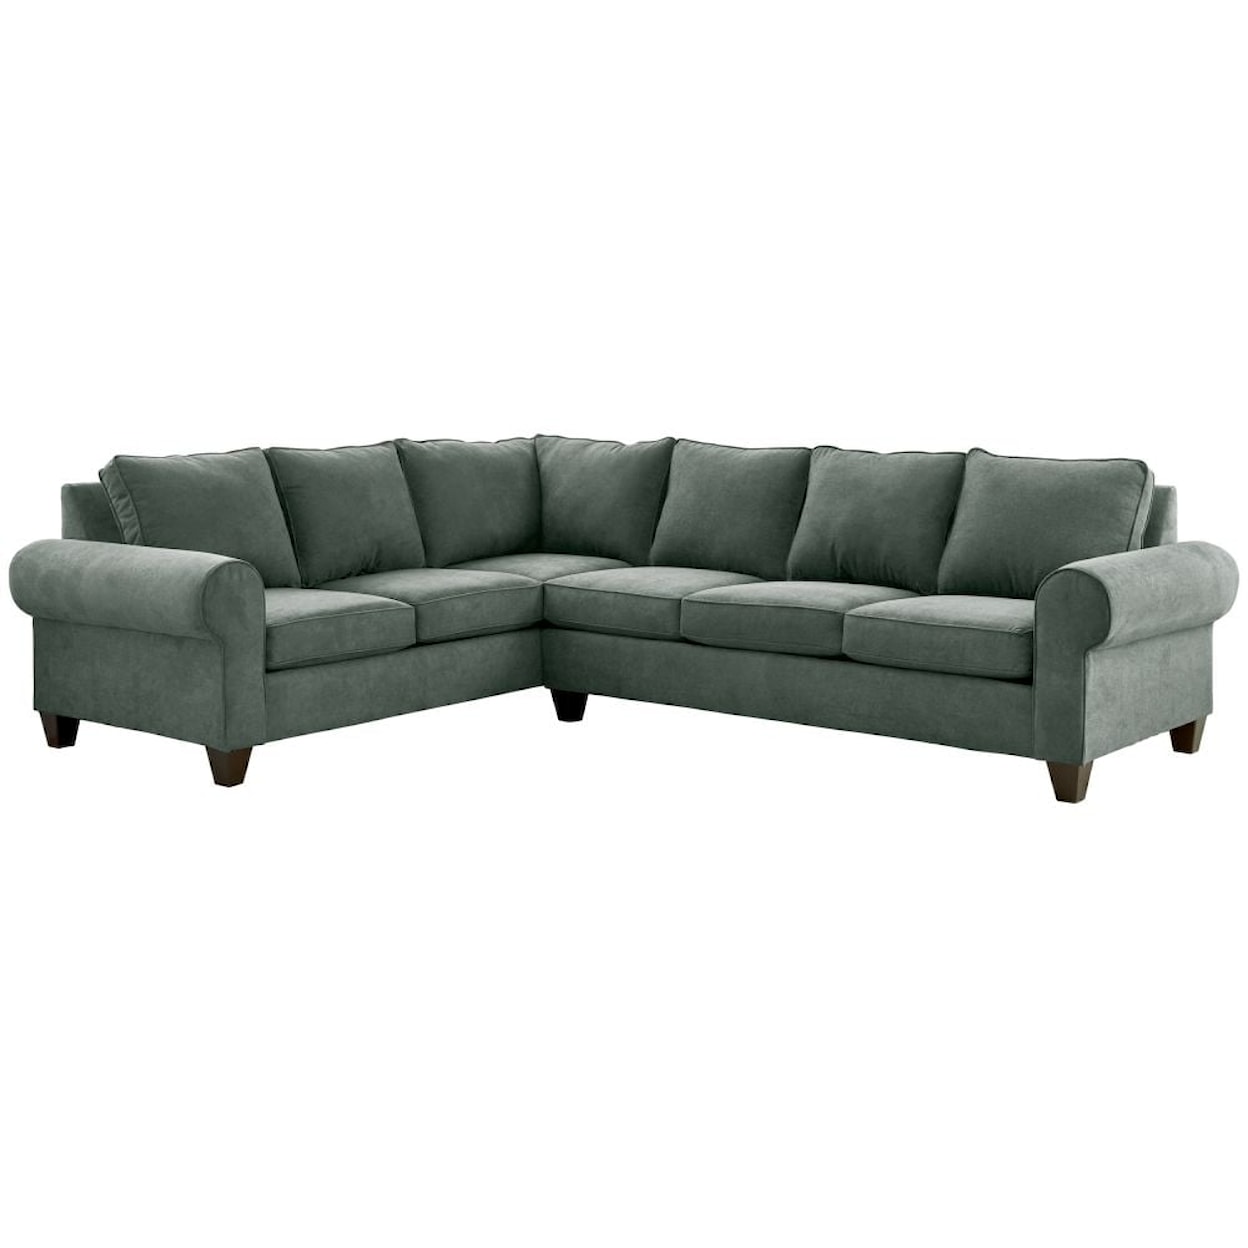 Elements 705 RHF Sectional Sofa with Rolled Arms